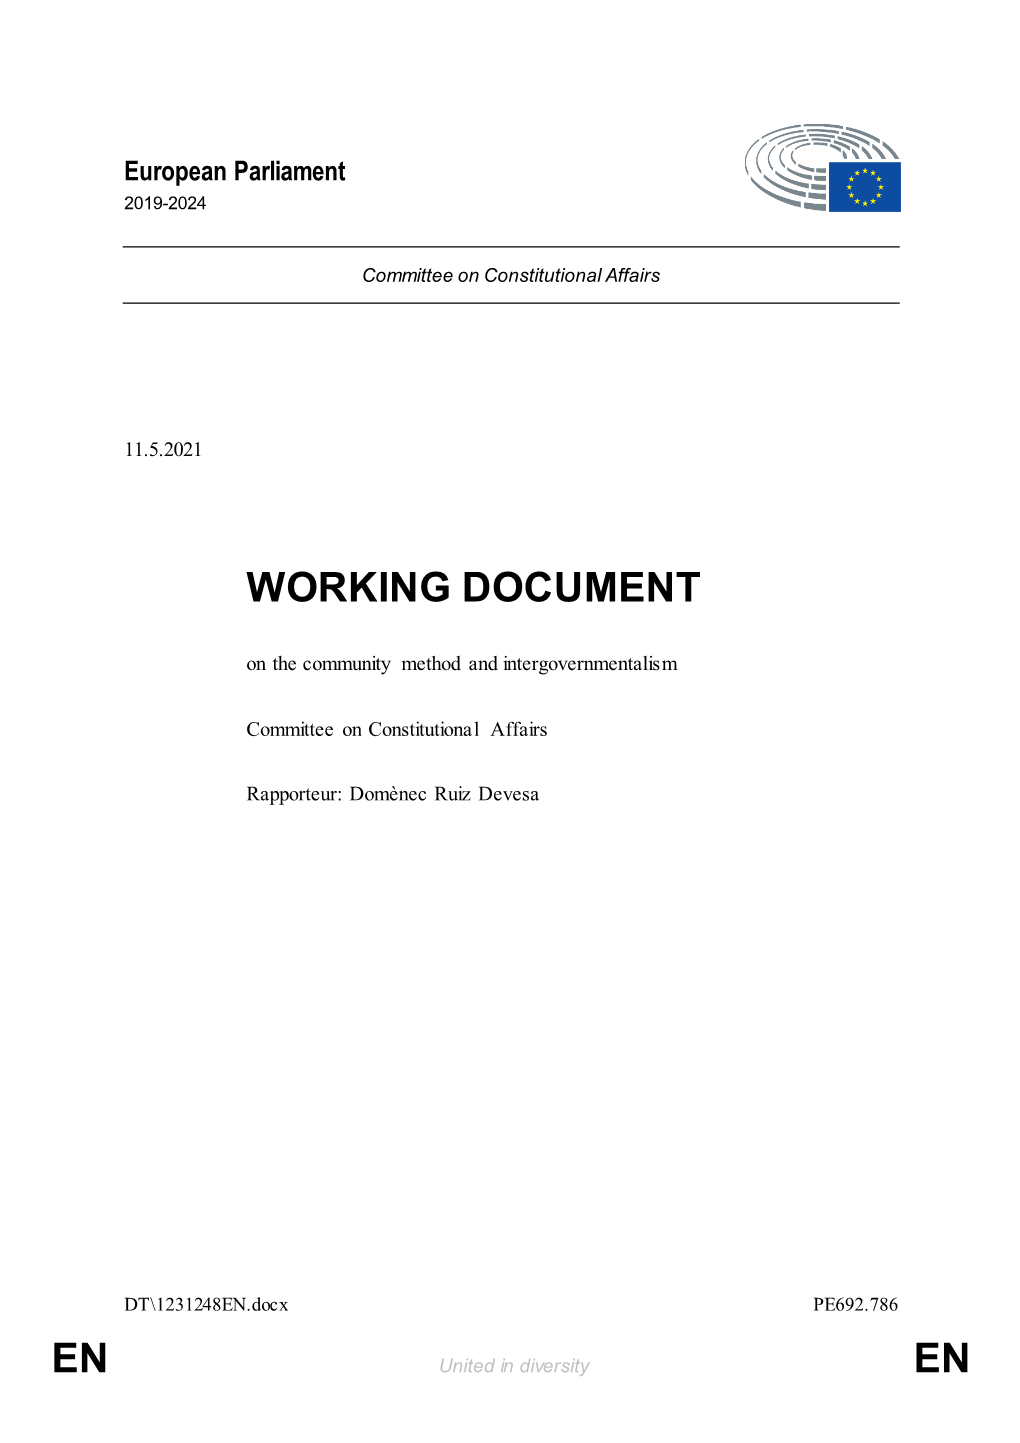 AFCO Working Document on the Community Method And